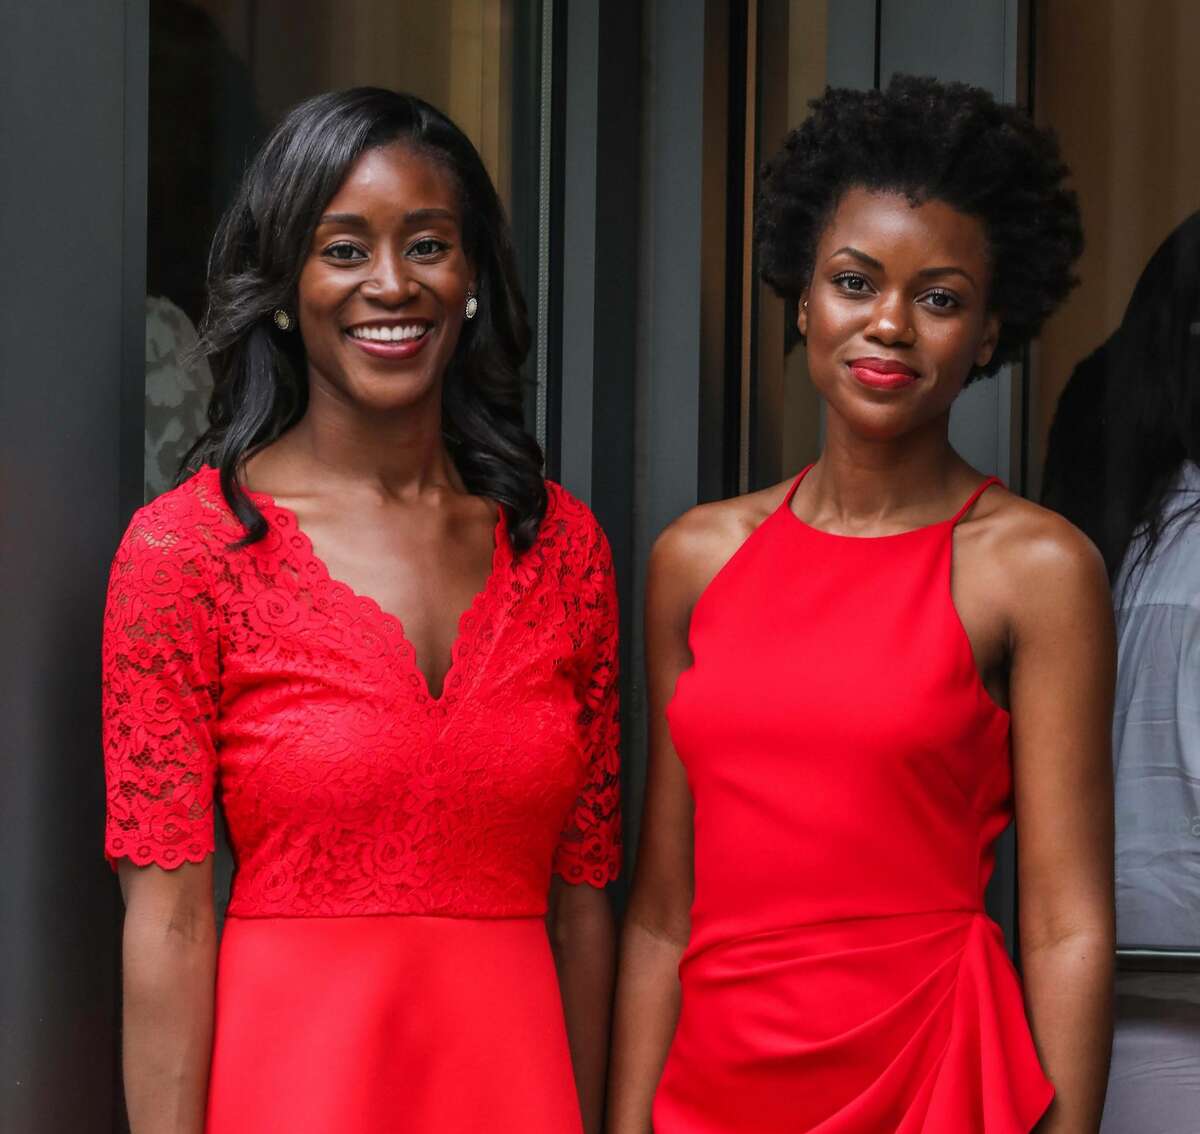 Maude Okrah and Simone Tetteh founded Bonnti, a new mobile app to help women of color find a hair stylist.